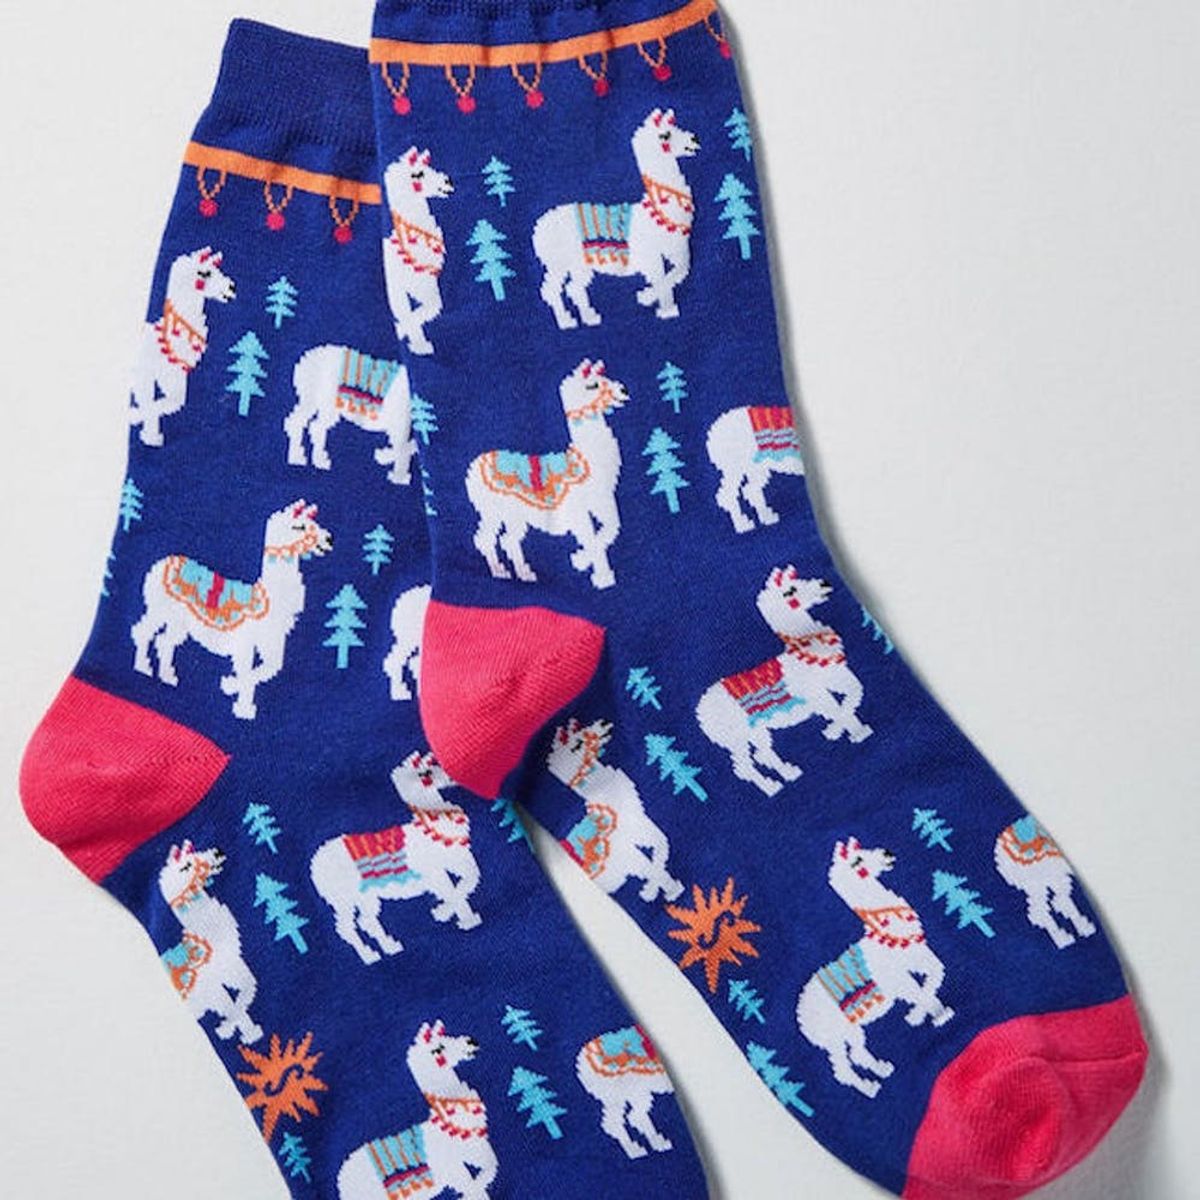 20 Patterned Socks That Will Make You Want to Show Some Ankle